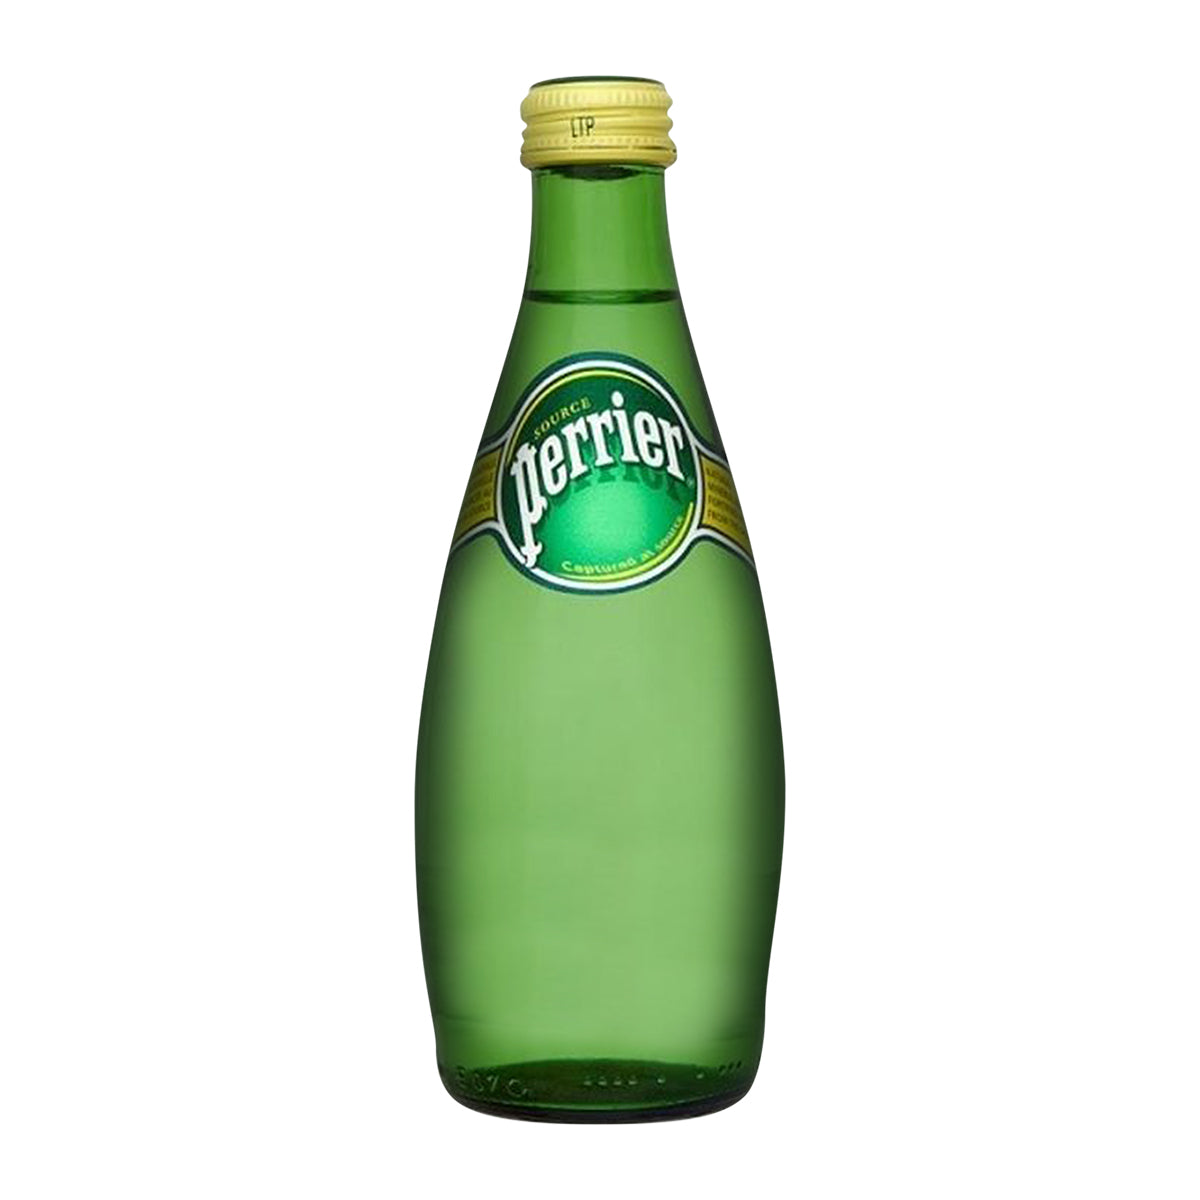 Perrier Natural Sparkling Water 750ml/330ml